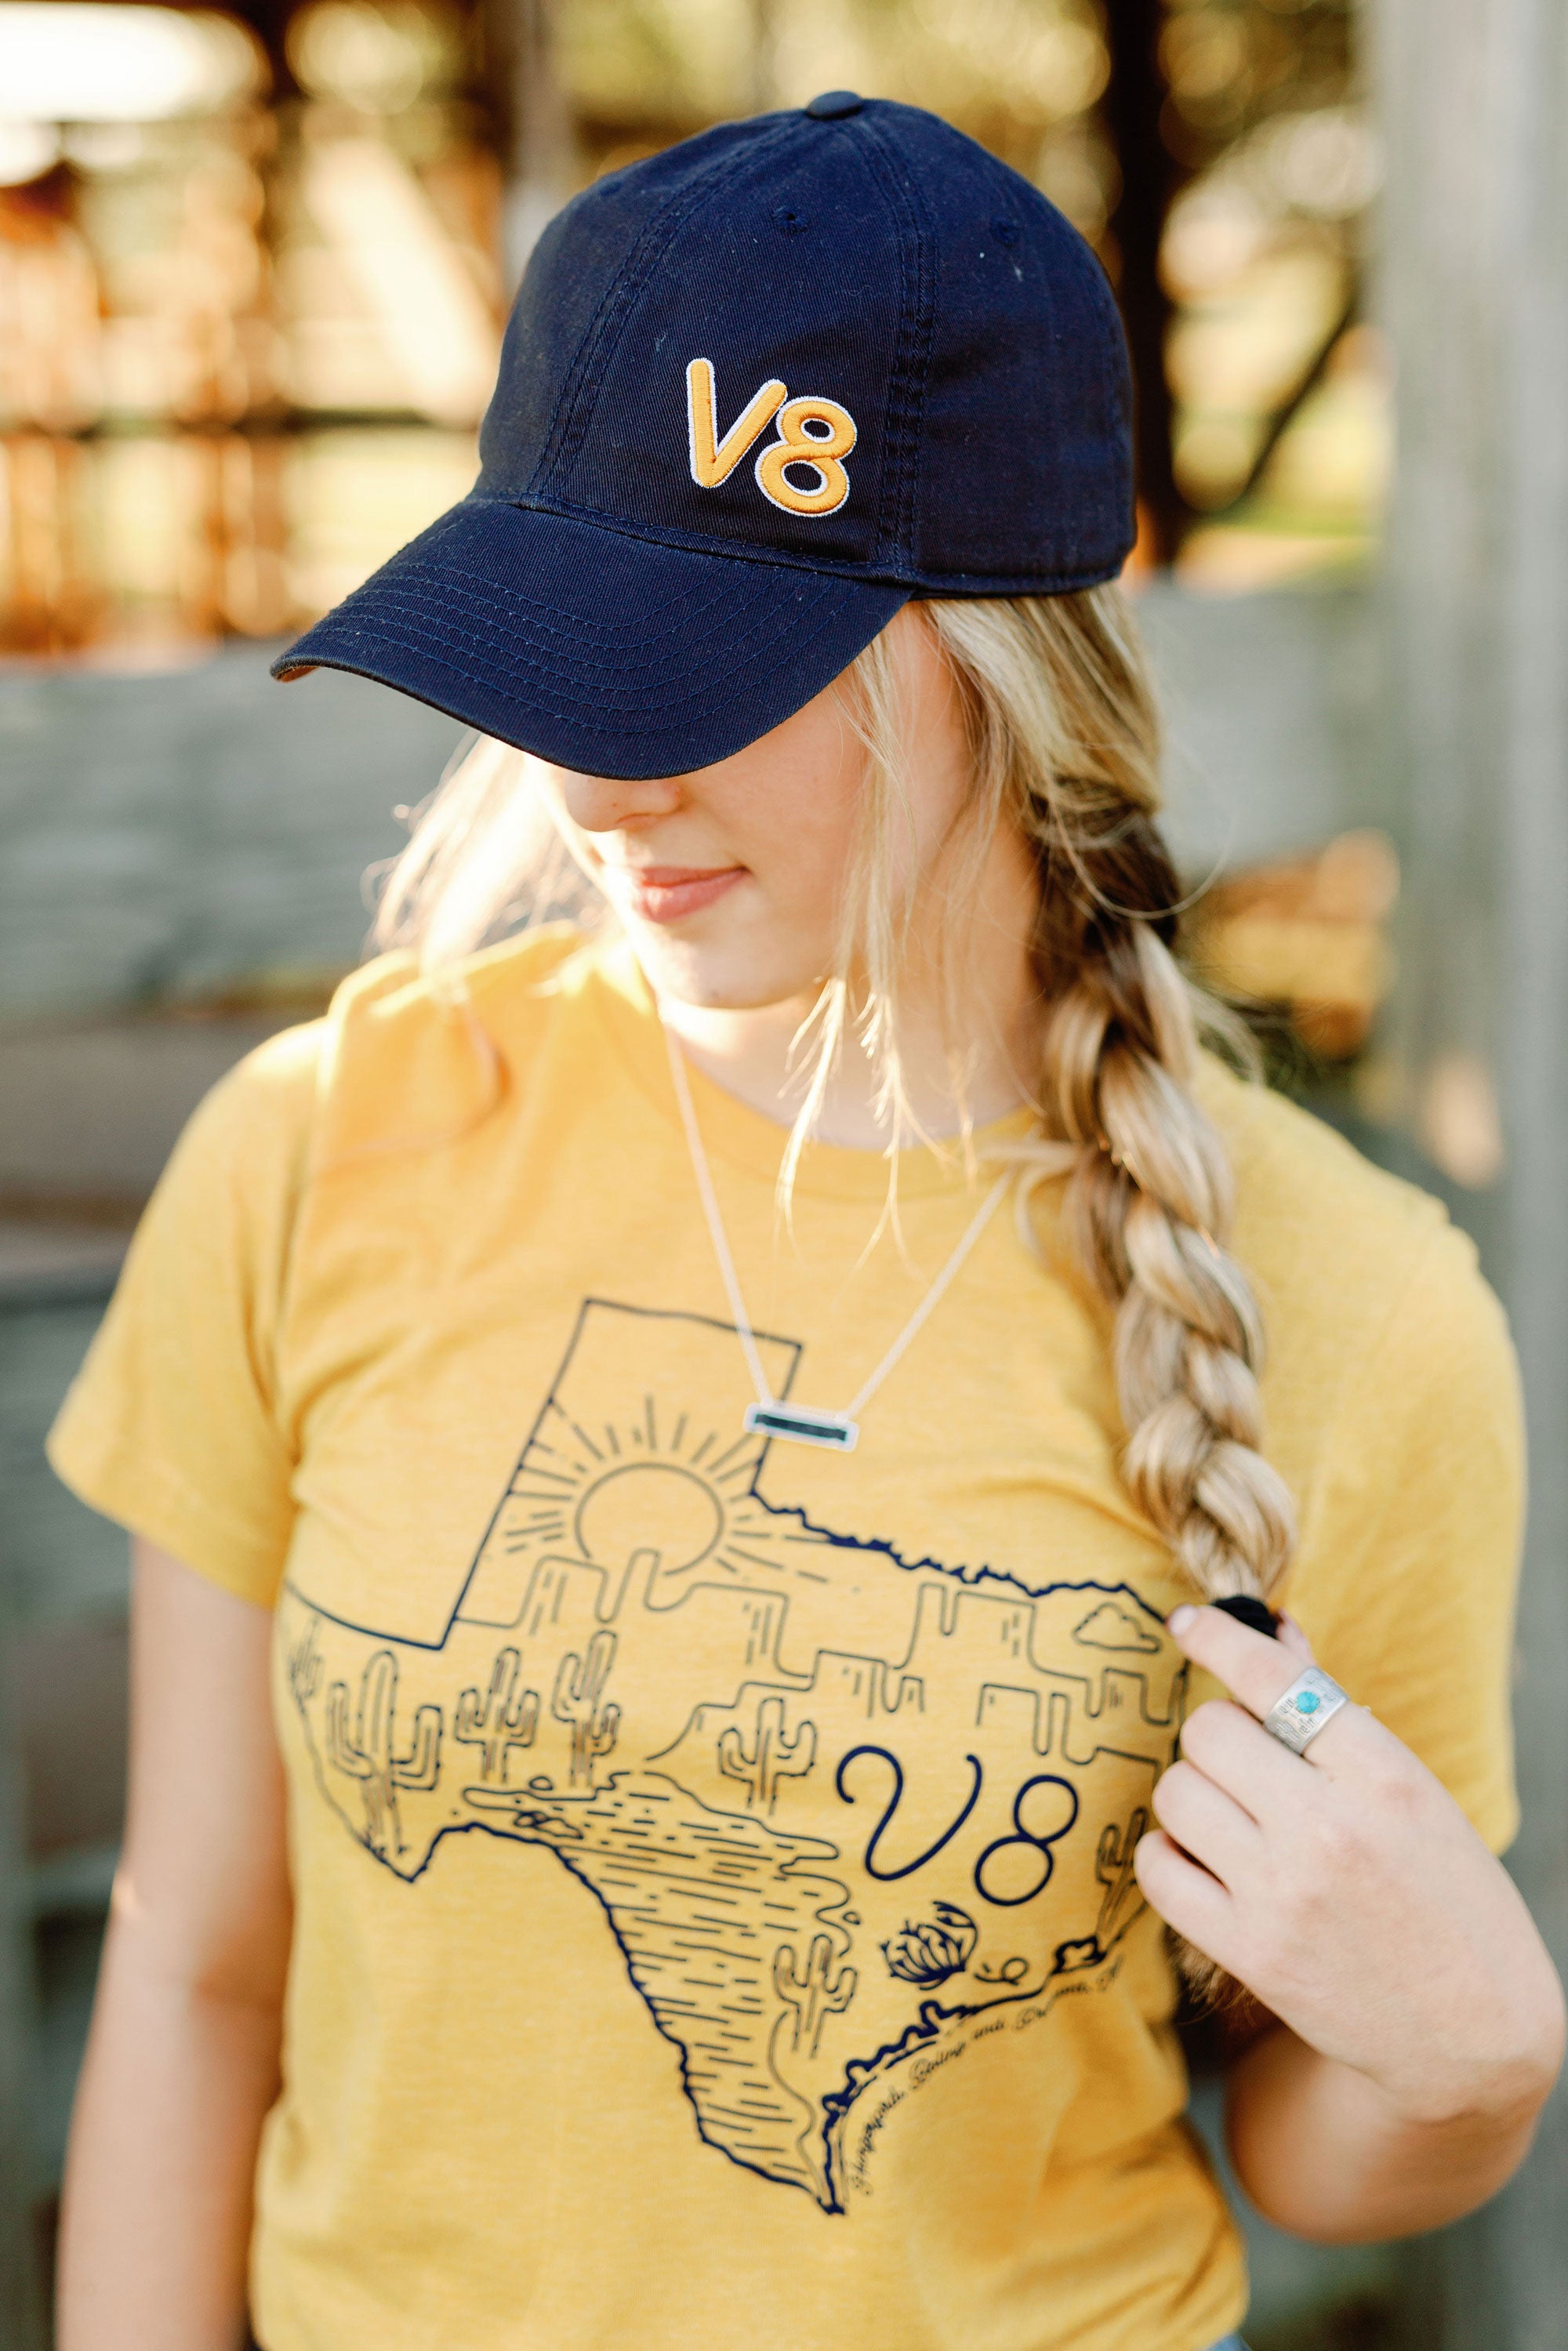 V8 The Mark of Excellence Navy Cap